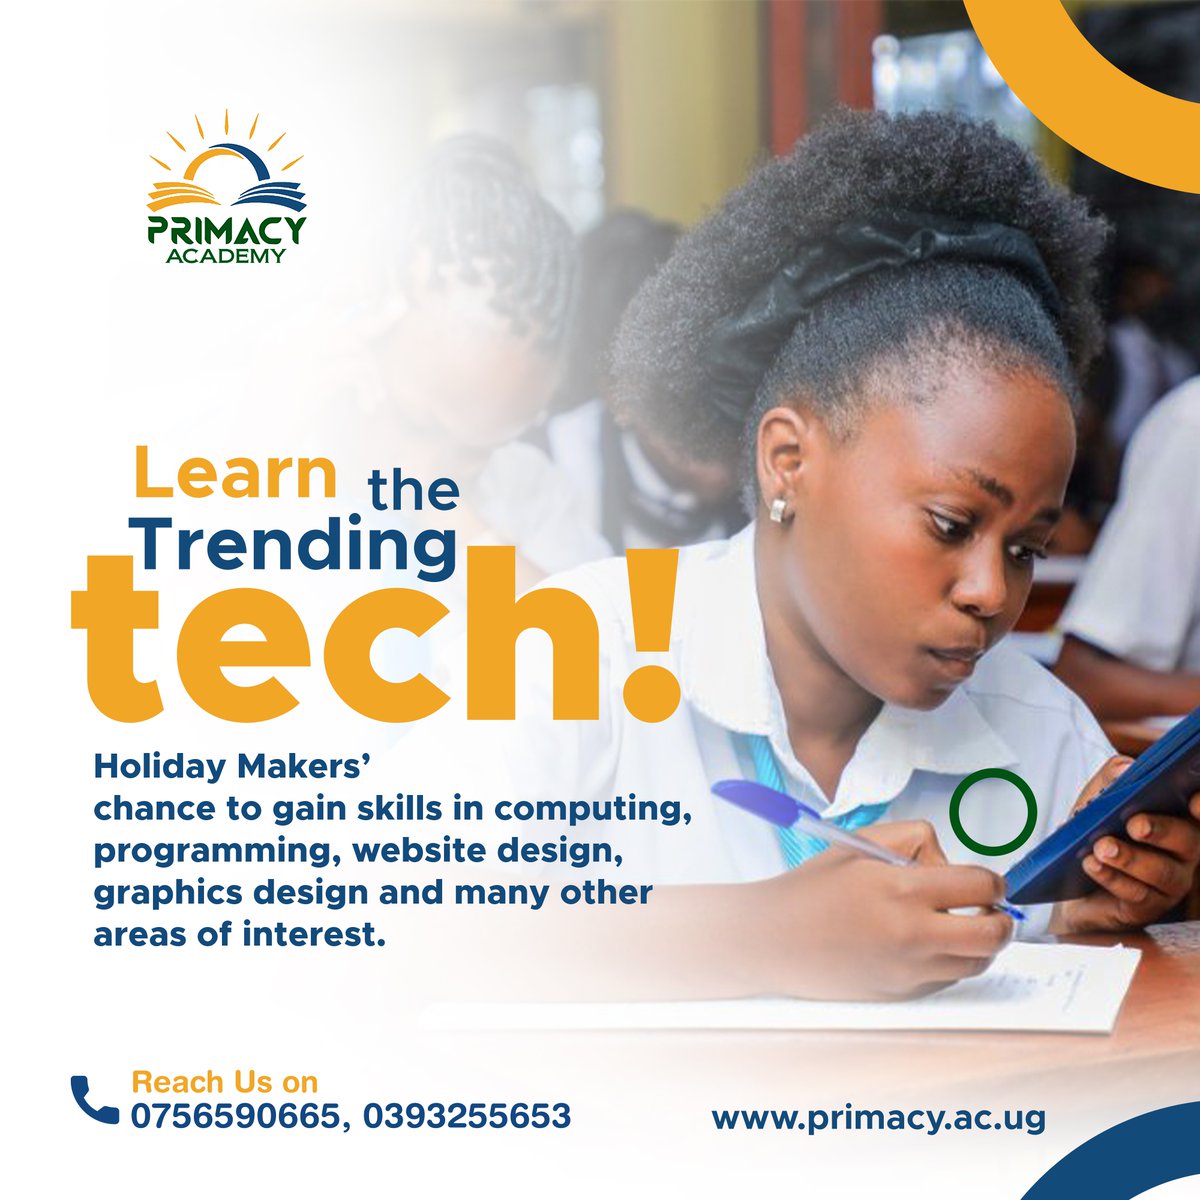 Don't sit back and relax in this holiday.  Join us at Primacy Academy to master the latest in computing, programming, web design, graphics design, and more. Your tech journey begins here! #LearnTech #SkillsForTomorrow #Innovation #PrimacyAcademy